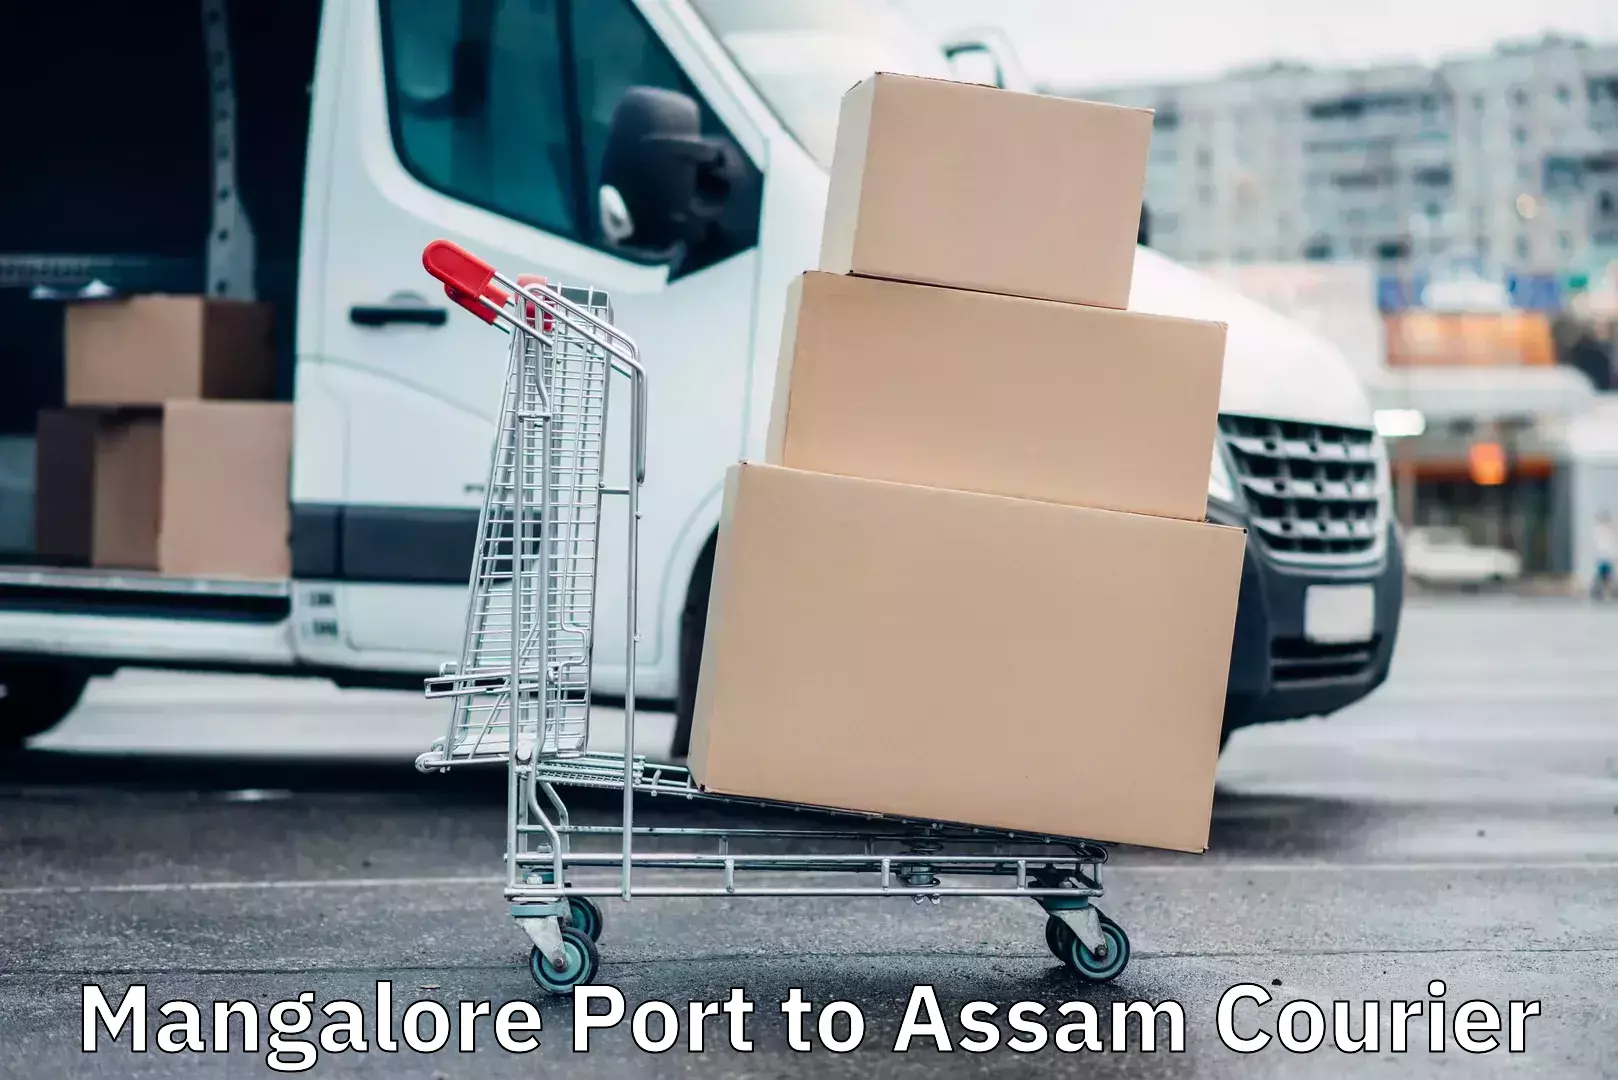 Multi-national courier services Mangalore Port to Assam